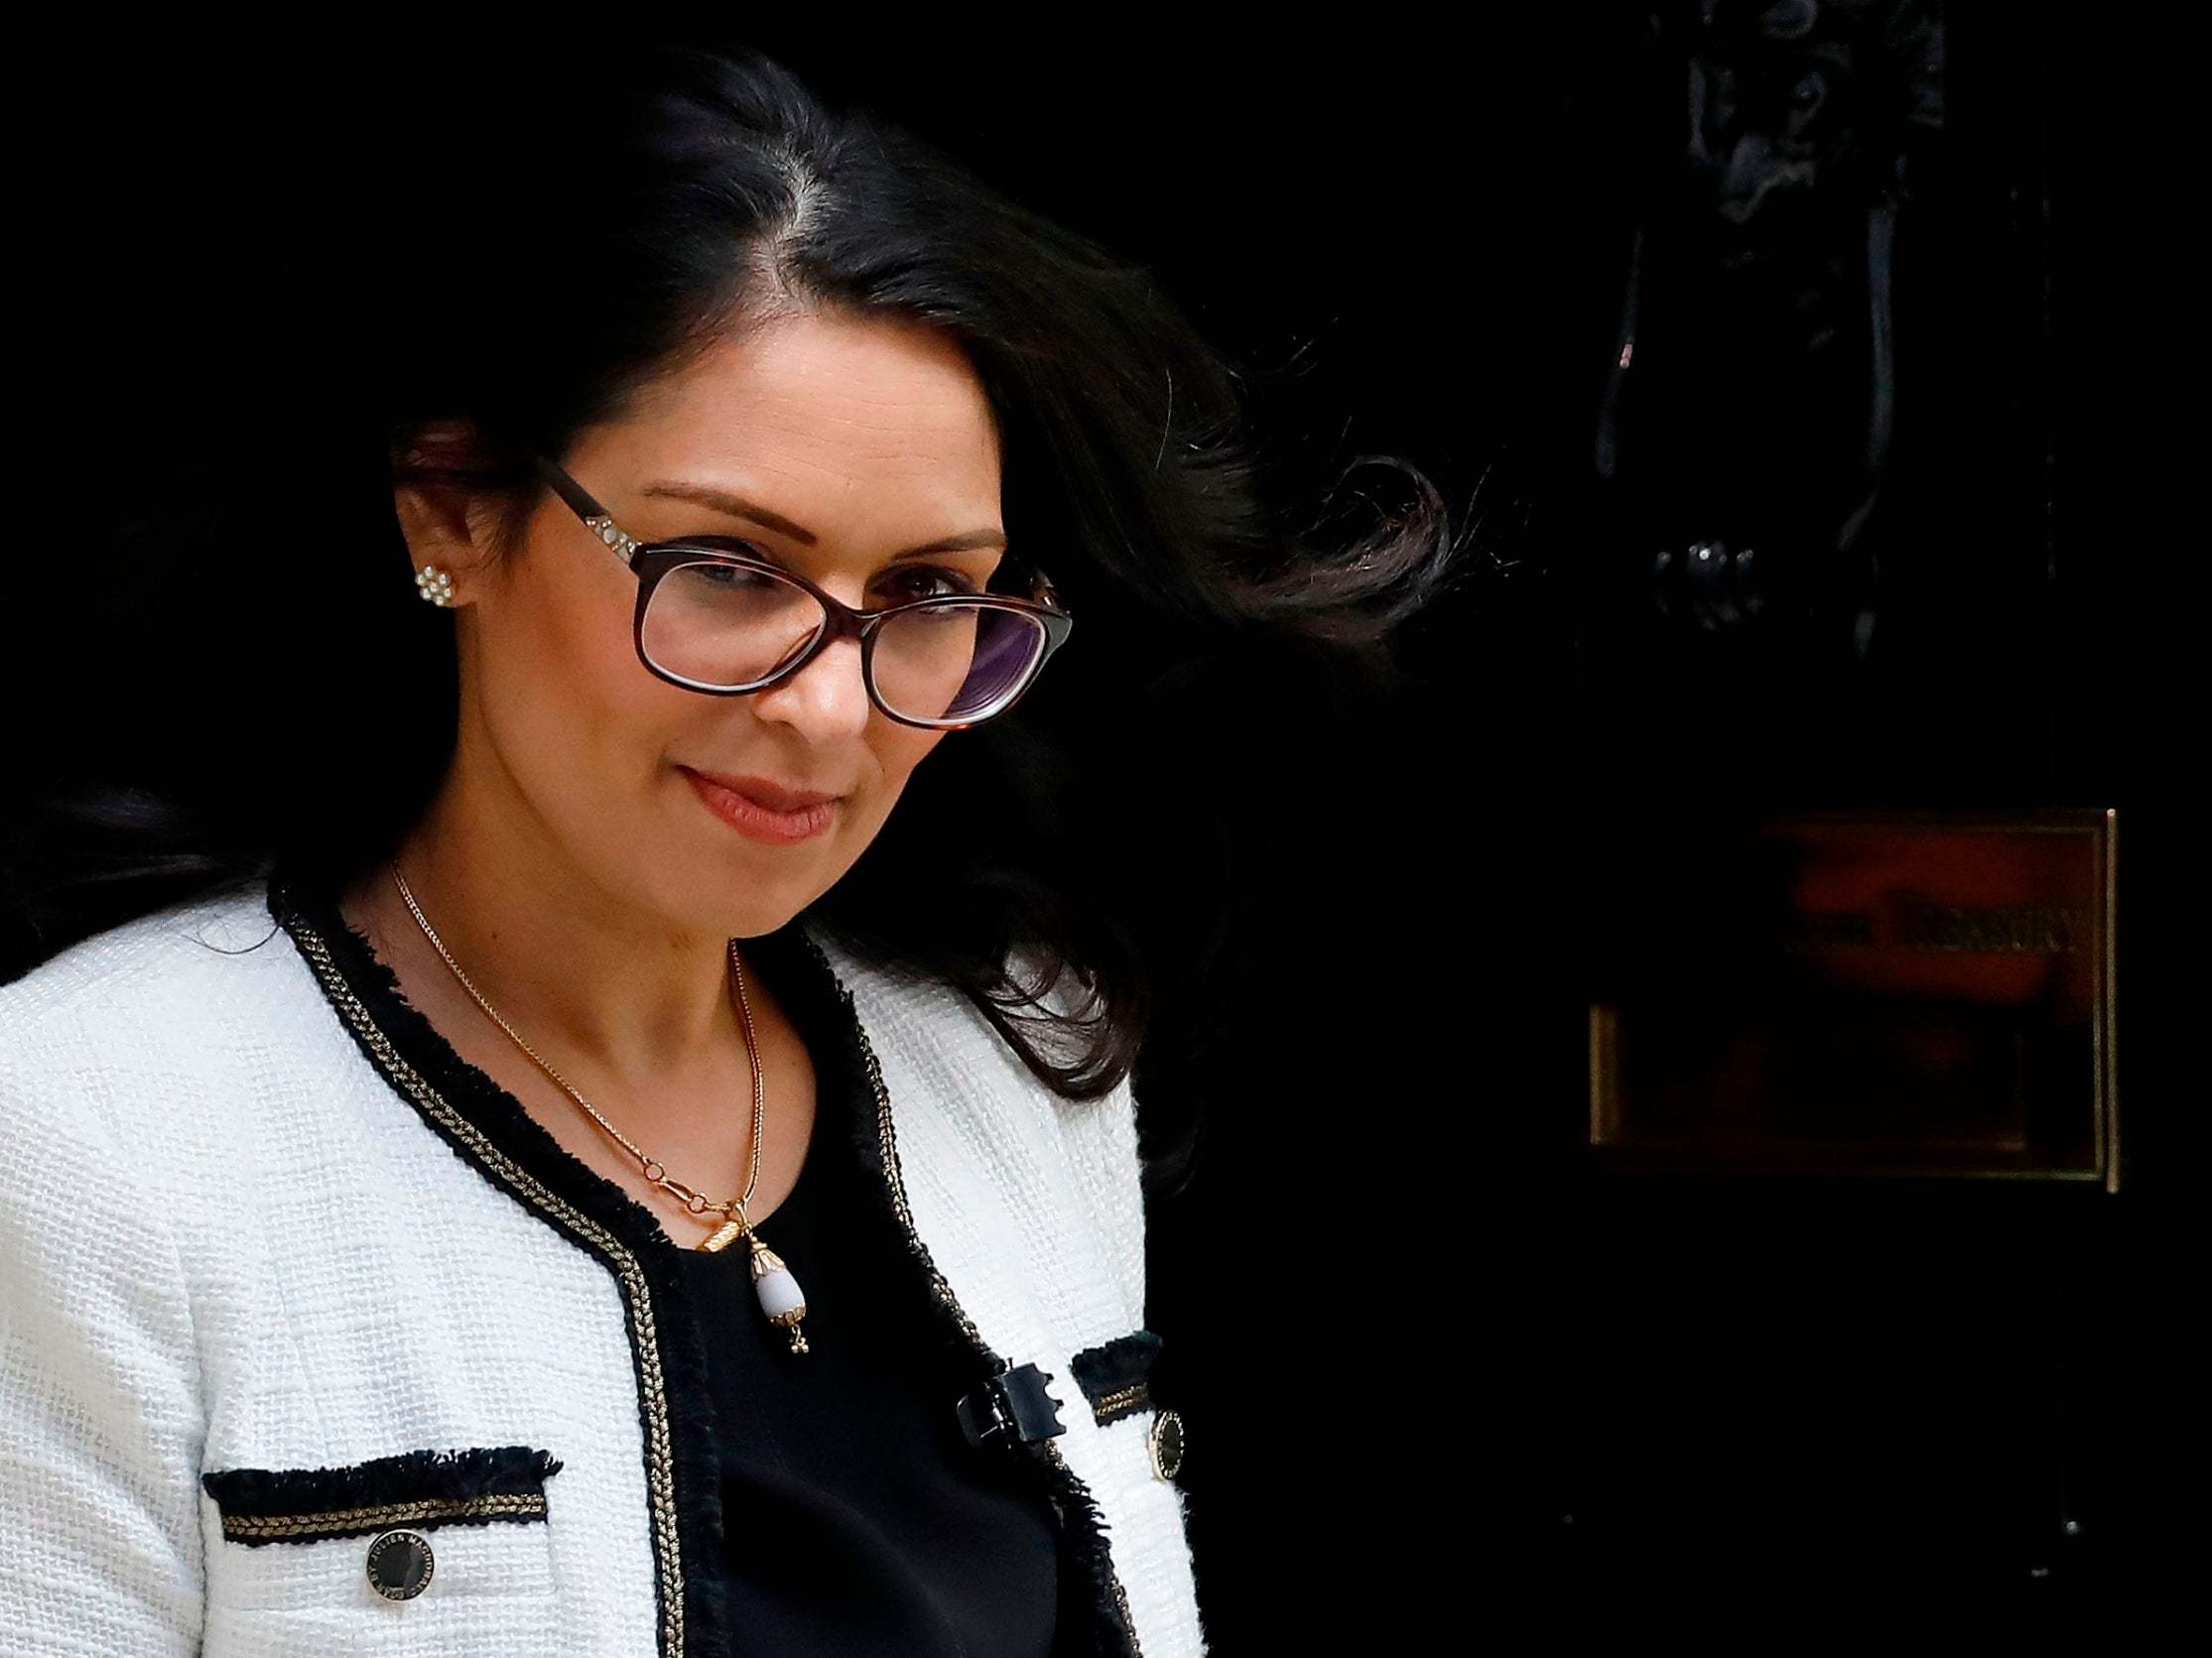 Priti Patel's immigration legislation is currently working its way through parliament